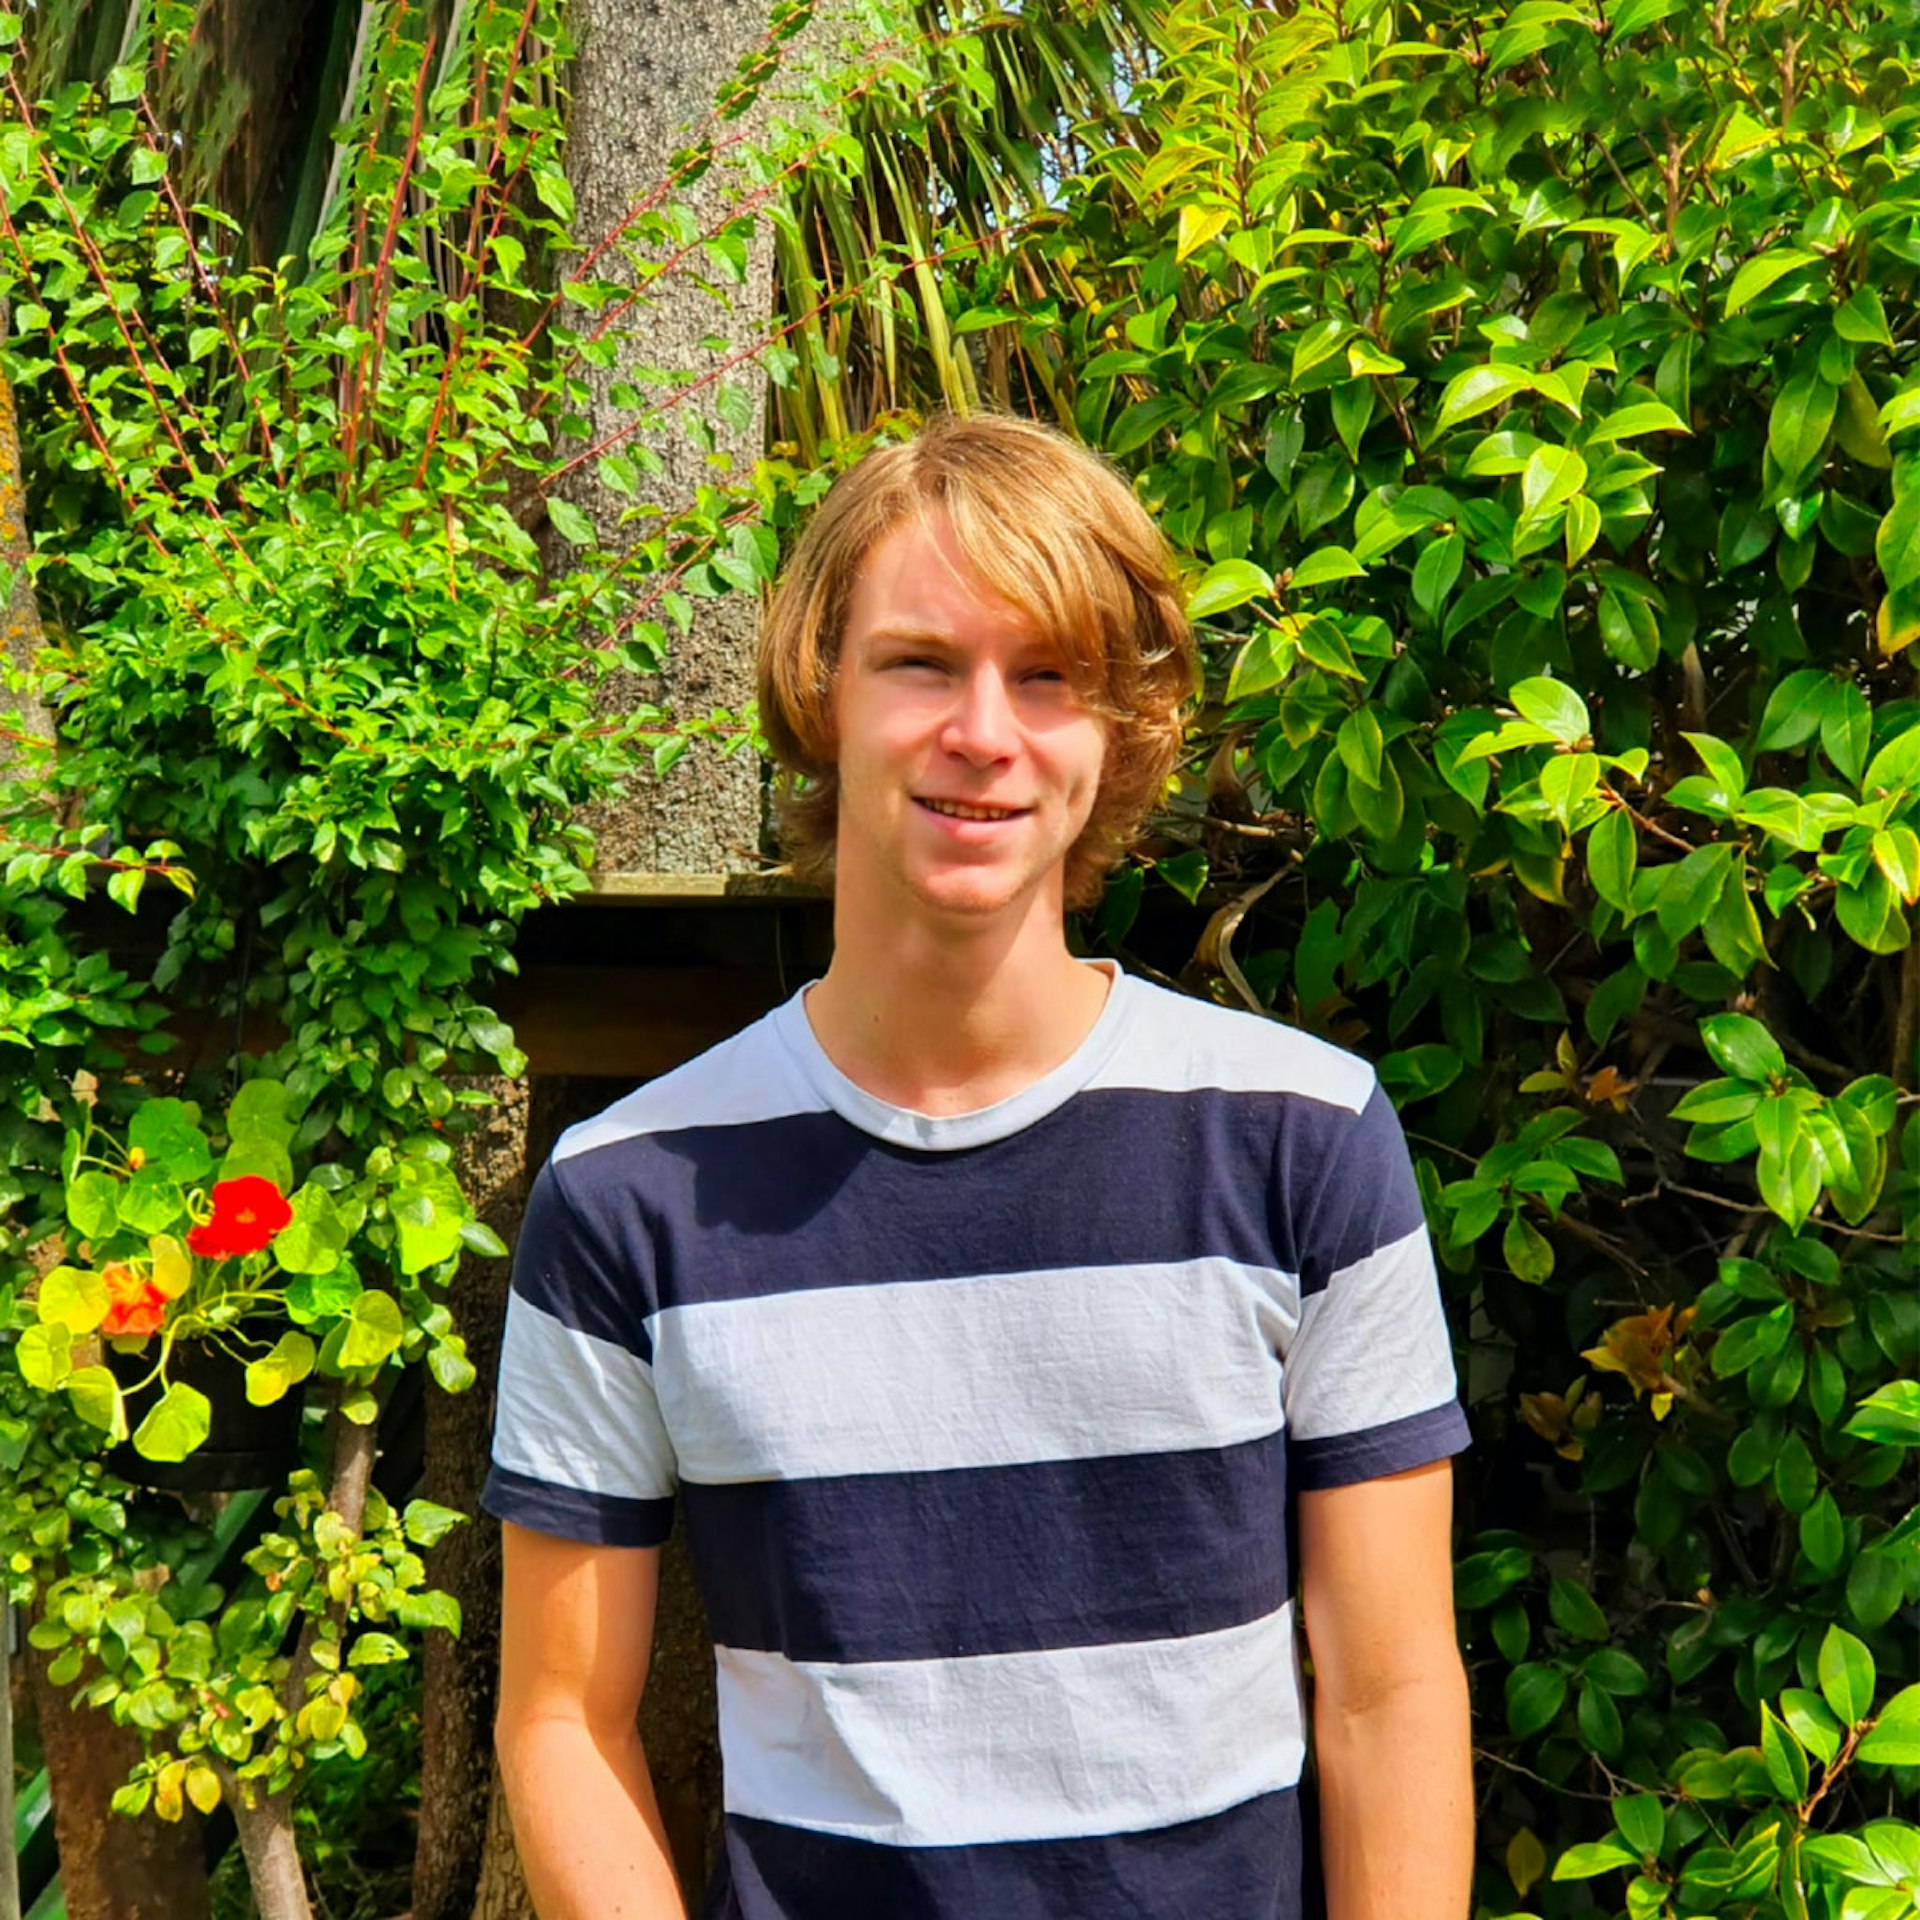 A young man wearing a striped t-shirt and jeans standing in front of some trees.